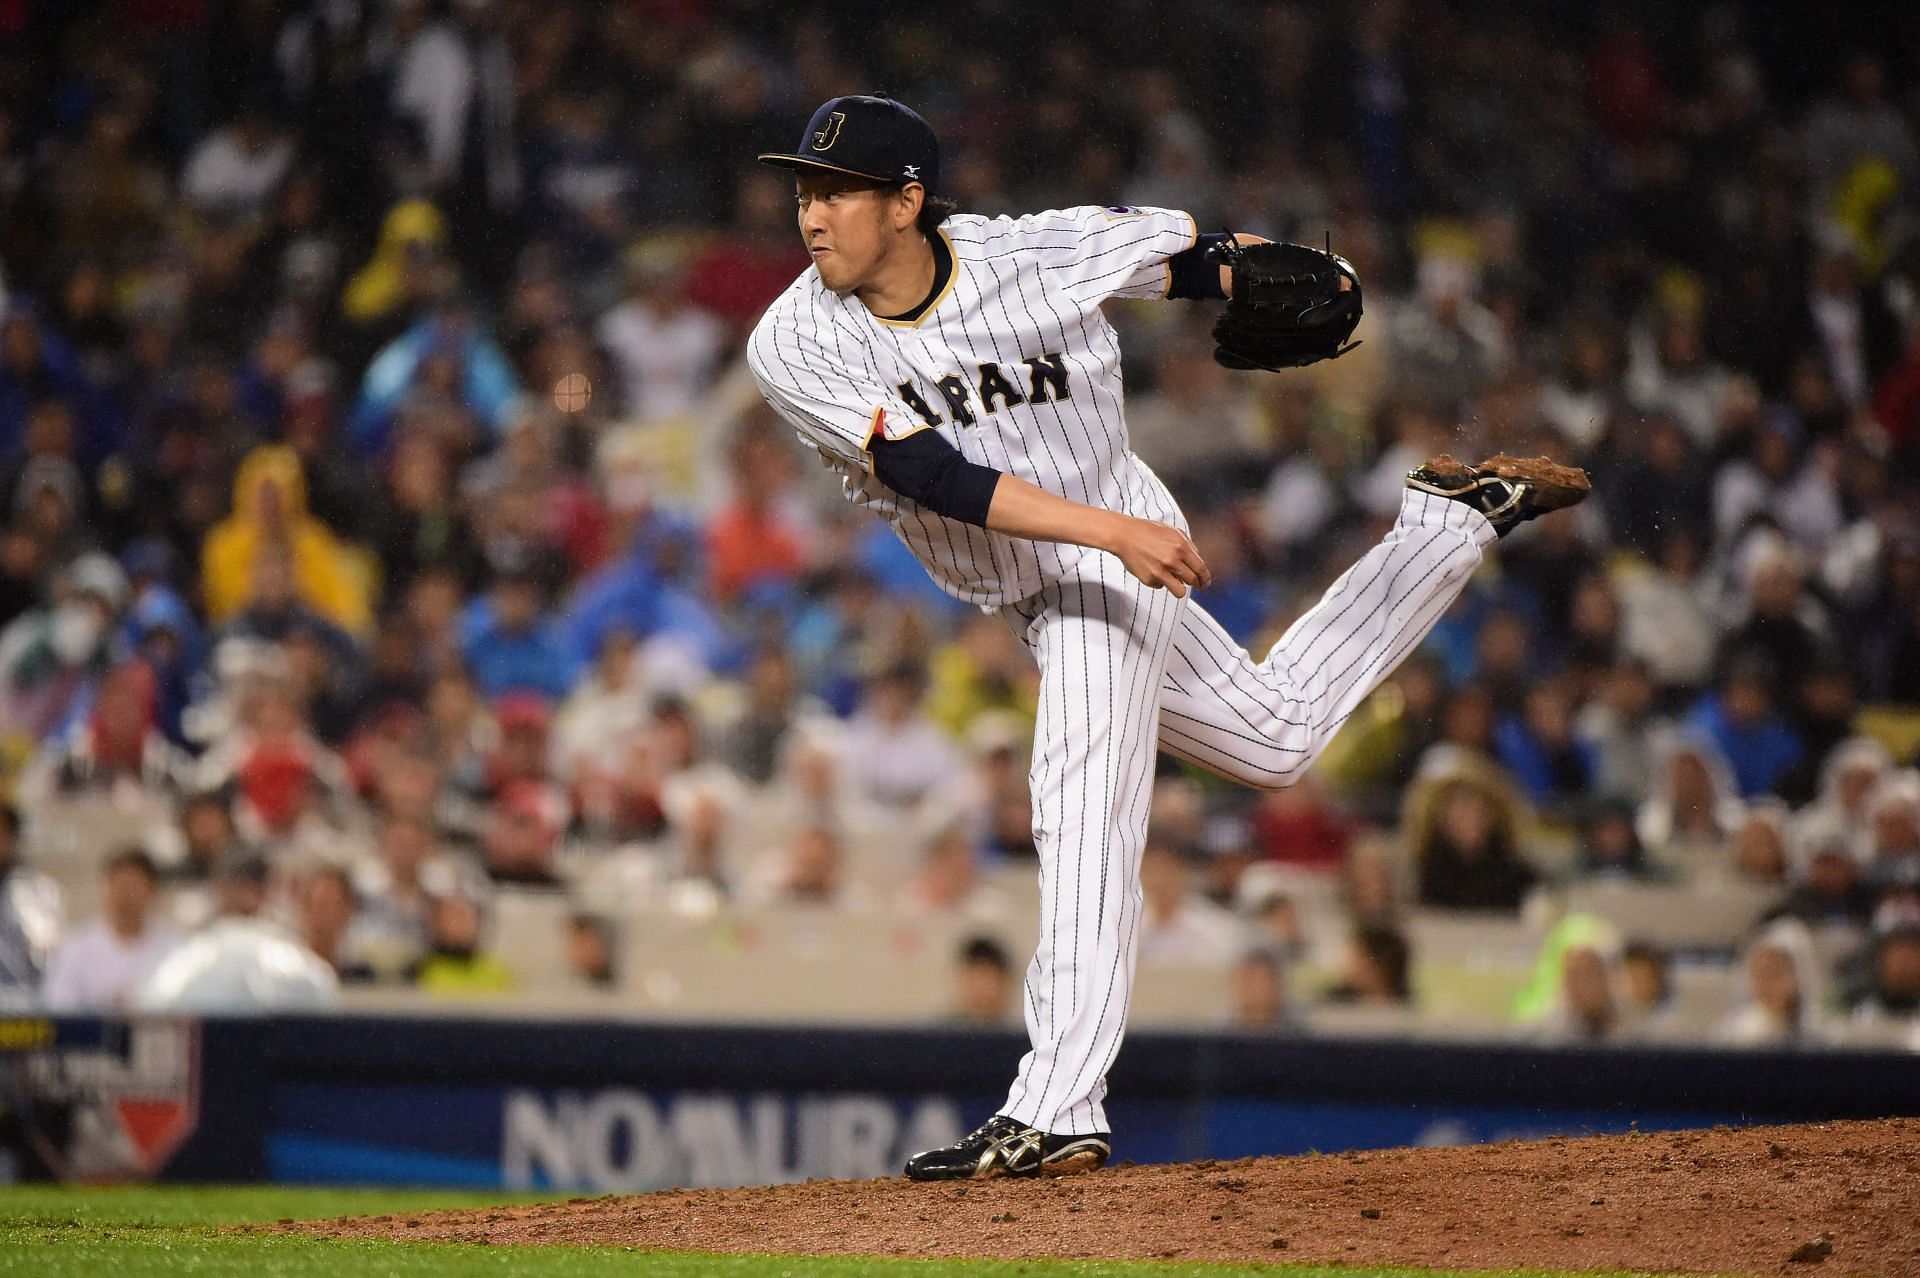 Yoshihisa Hirano of Japan pitches in the ninth inning against the United States.